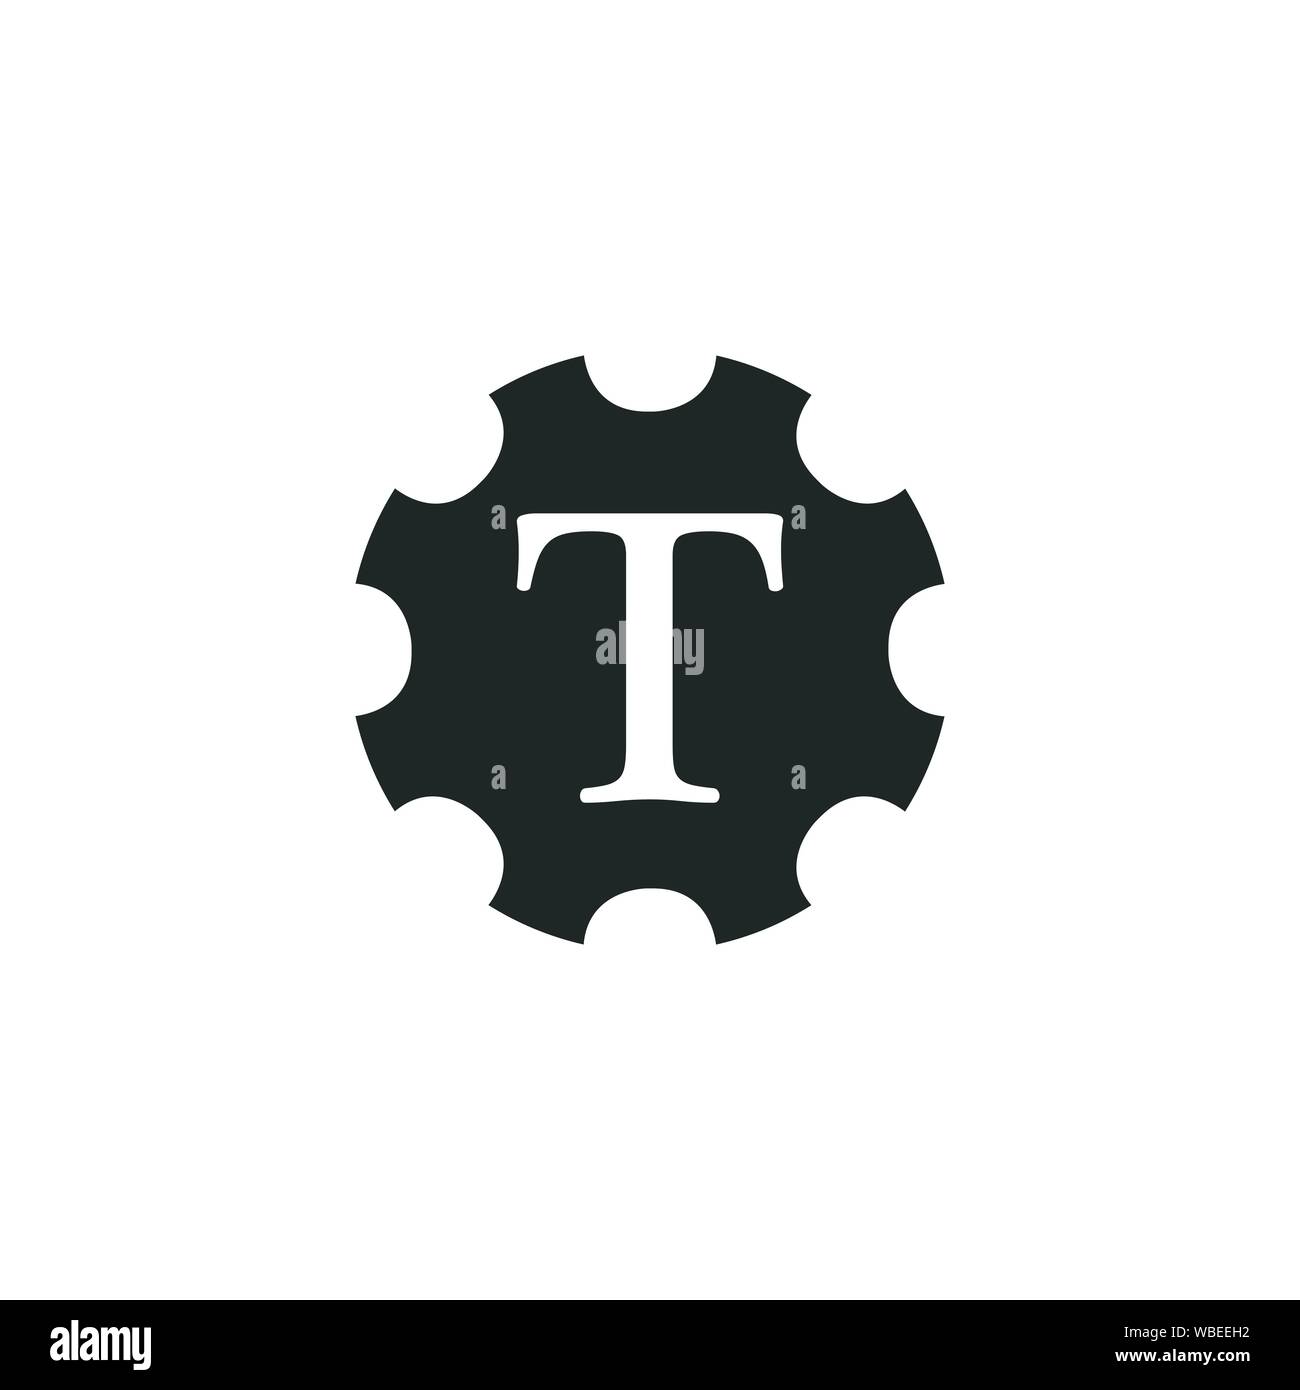 abstract symbol of letter t in gear. template logo design. Stock vector illustration isolated on white background. Stock Vector